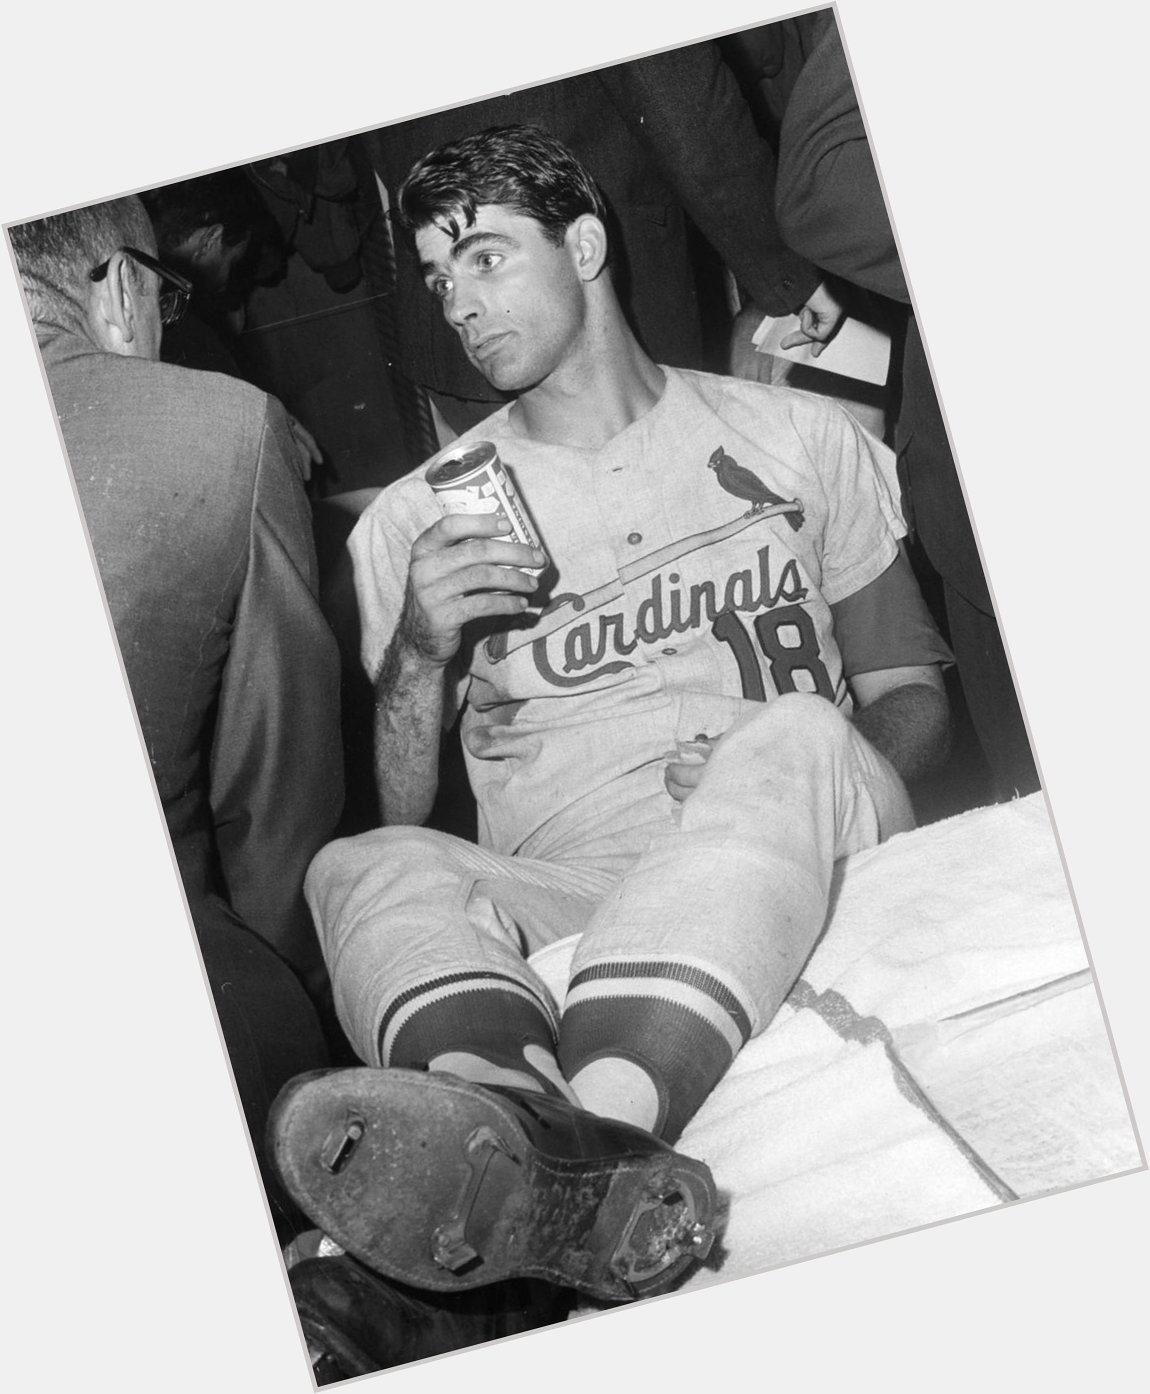 Happy birthday to Mike Shannon, who I can only imagine is celebrating in typical Mike Shannon style. 